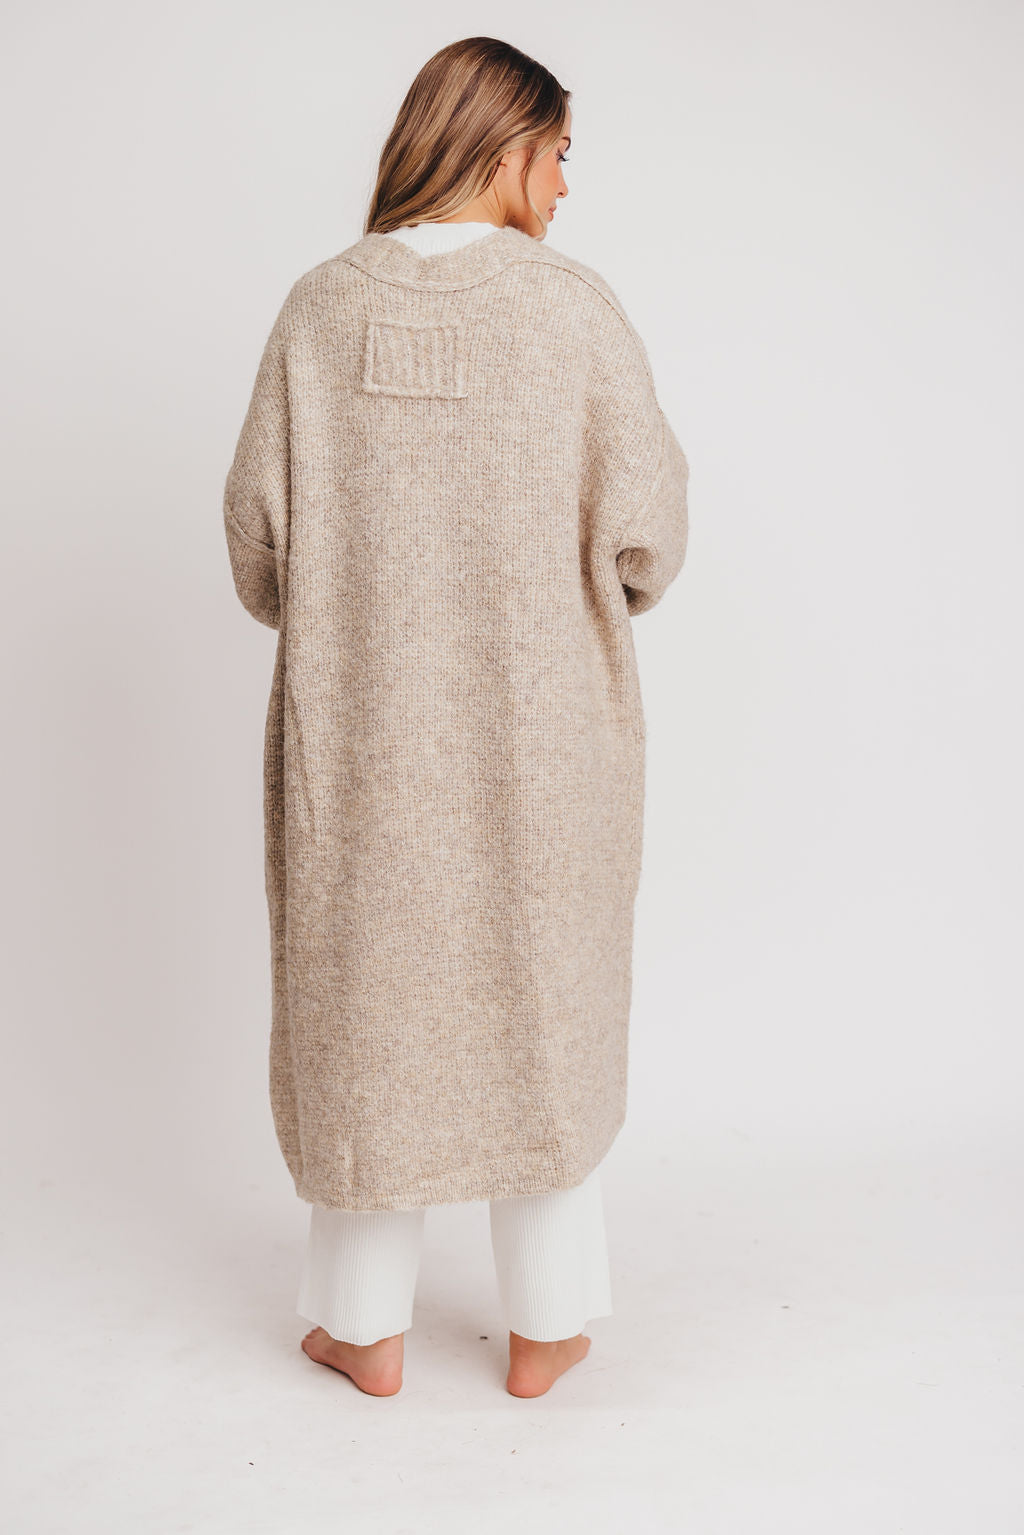 Cardigan in – Oatmeal Collective Edge Amelia Oversized Worth Rolled